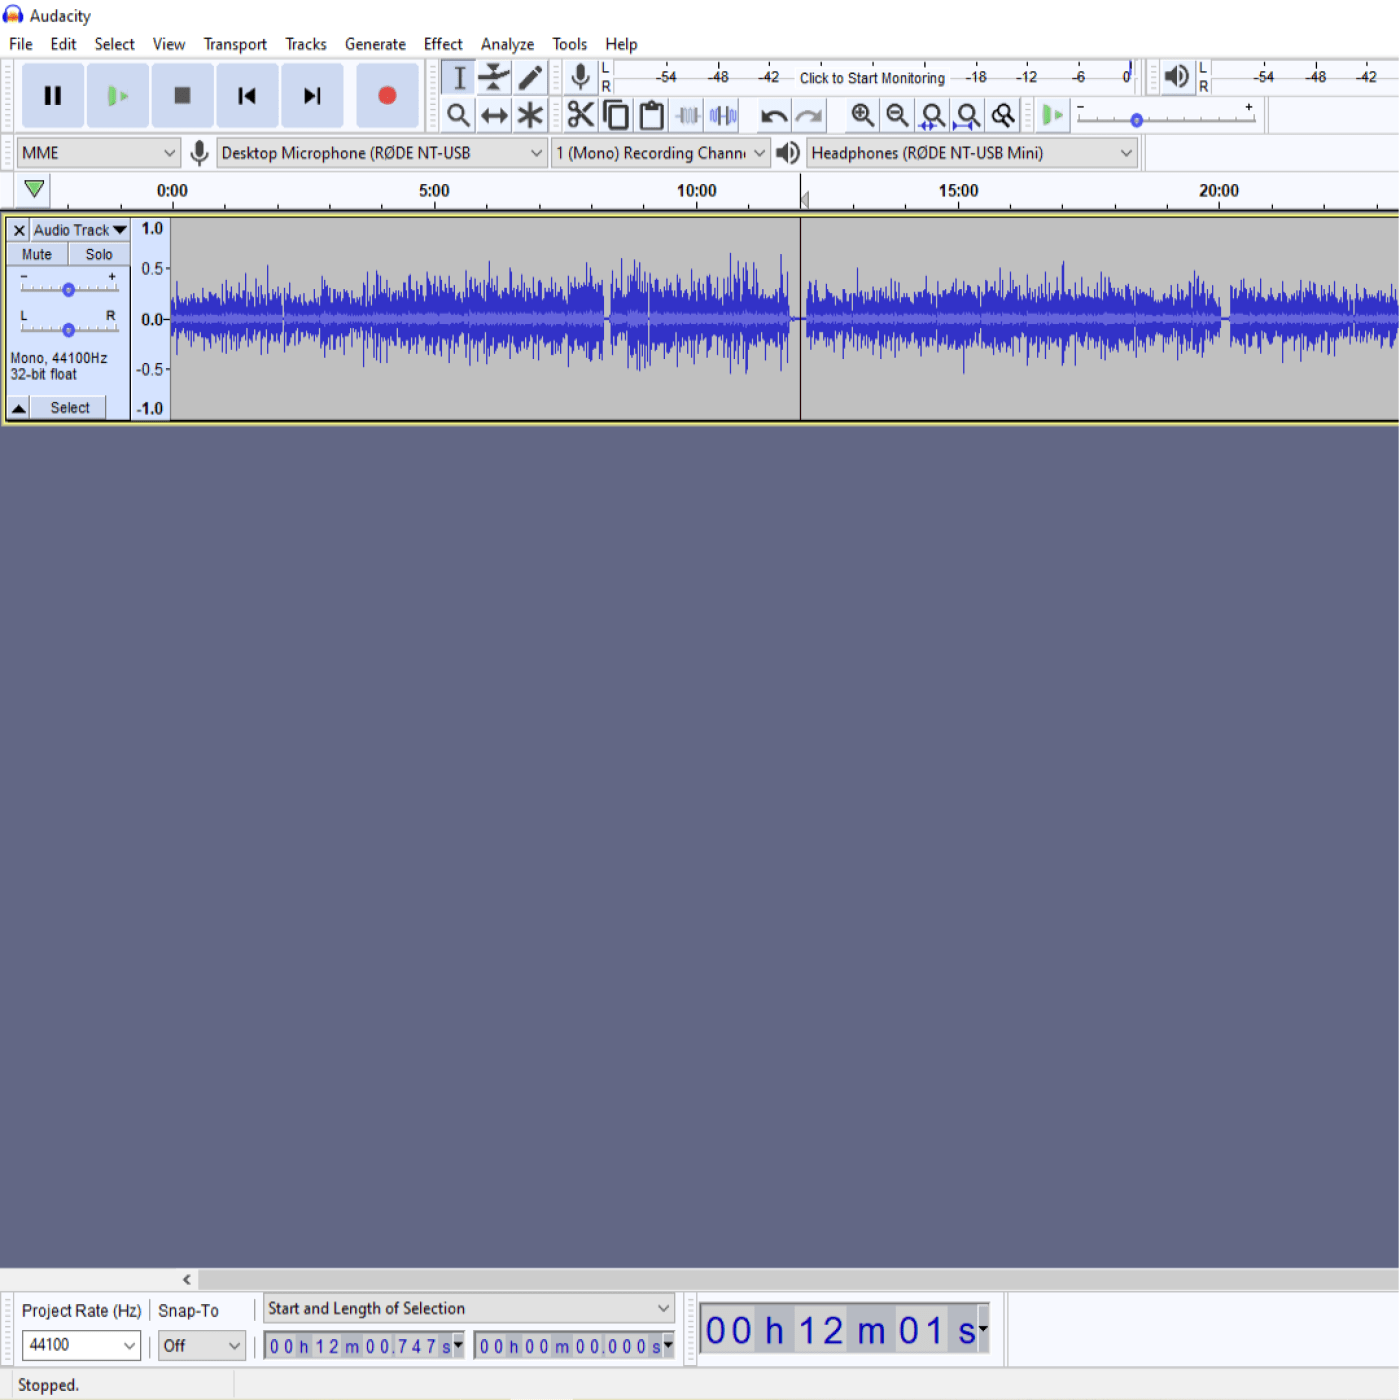 A screenshot of a waveform being edited in my sound editing program.